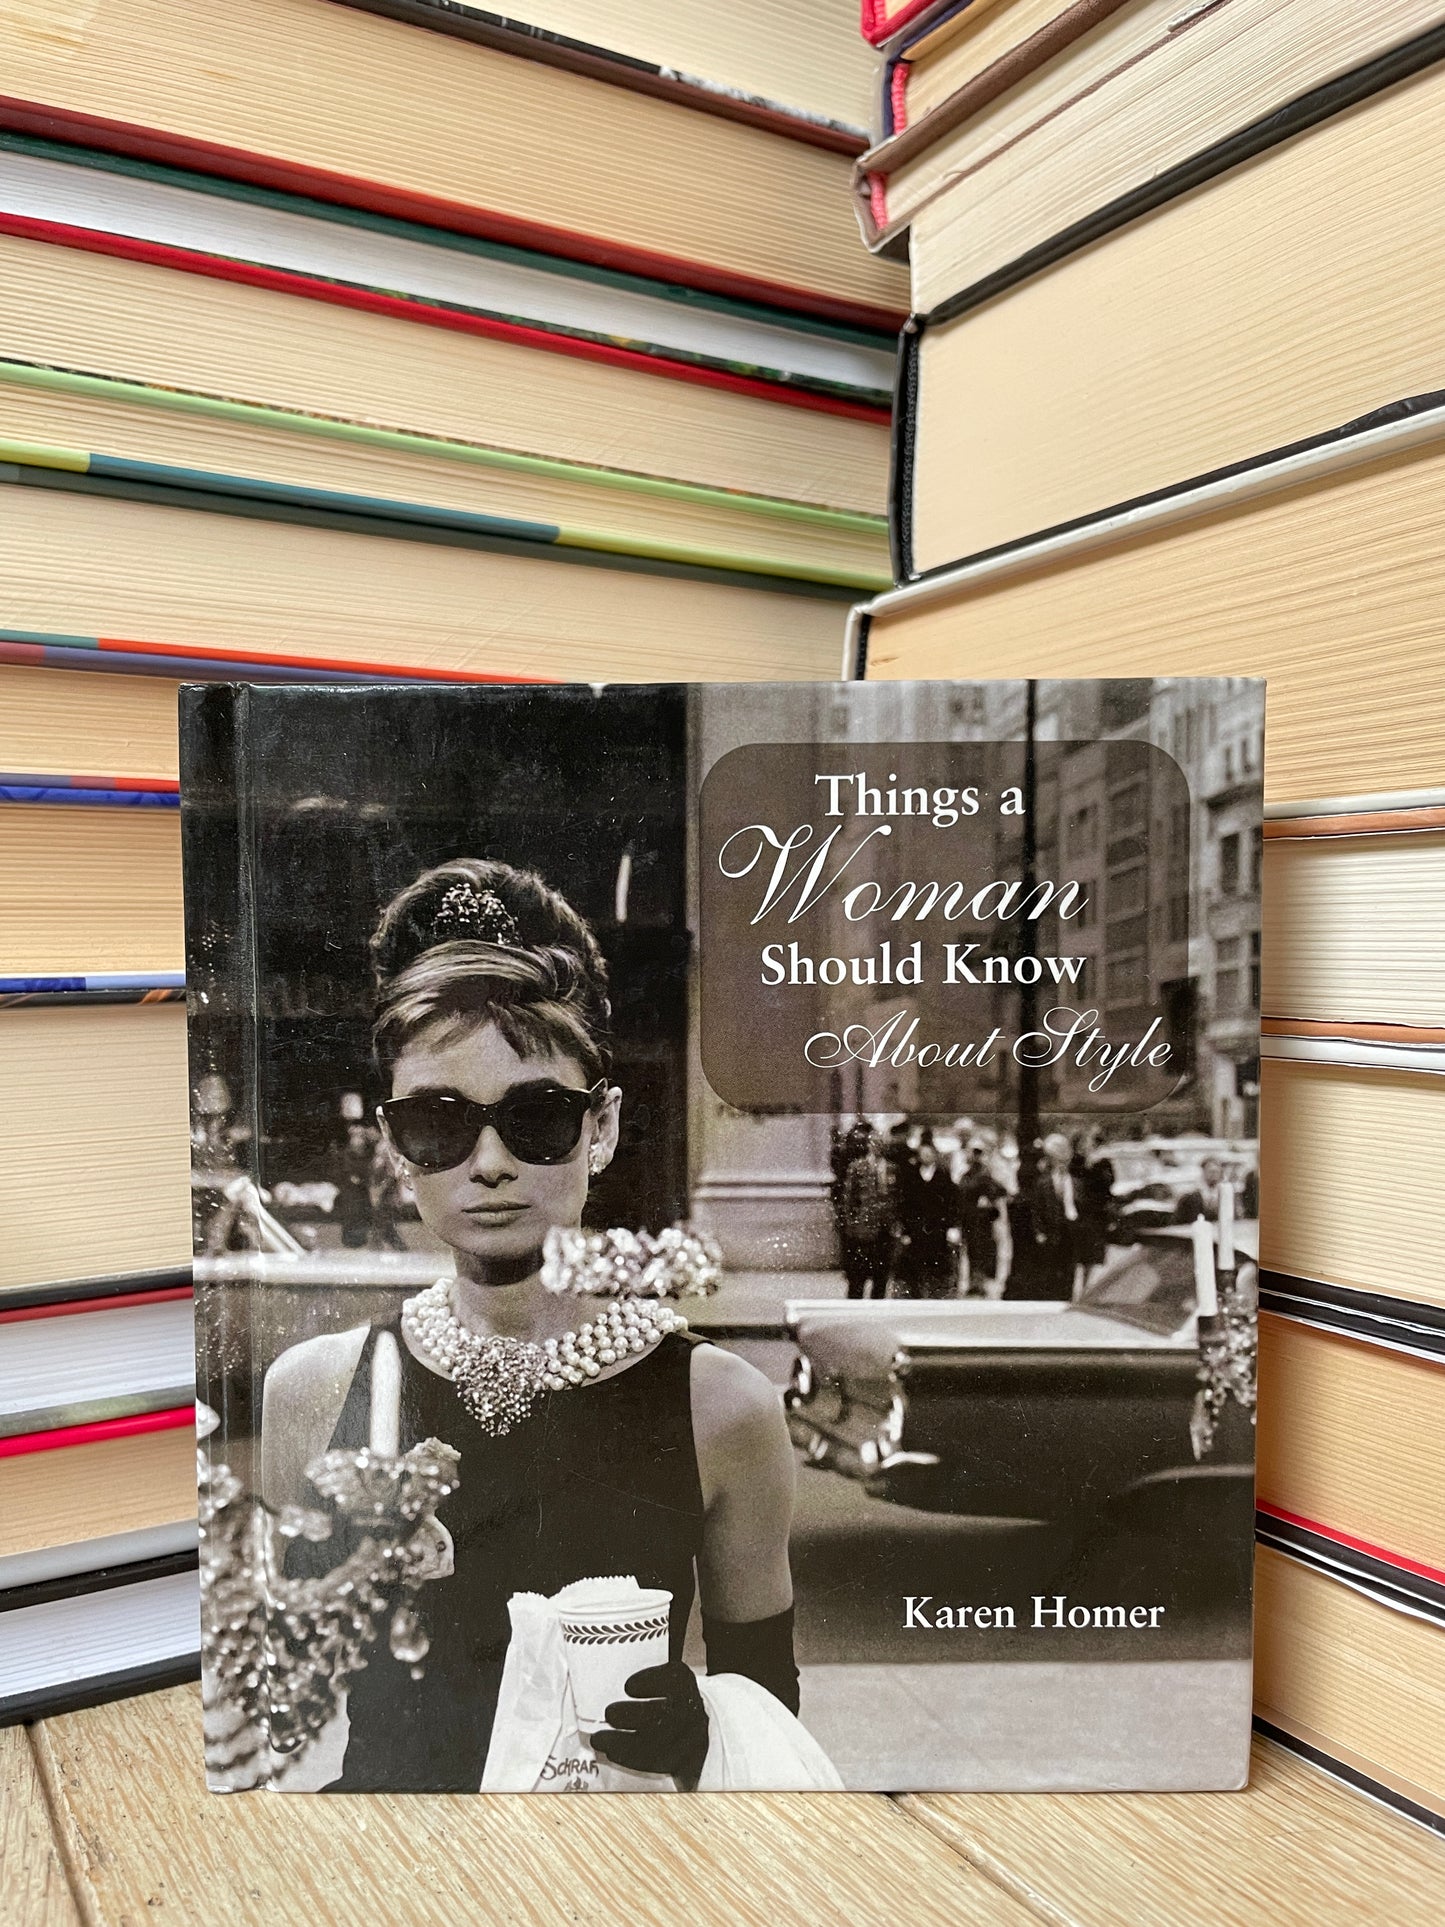 Karen Homer - Things a Woman Should Know About Style